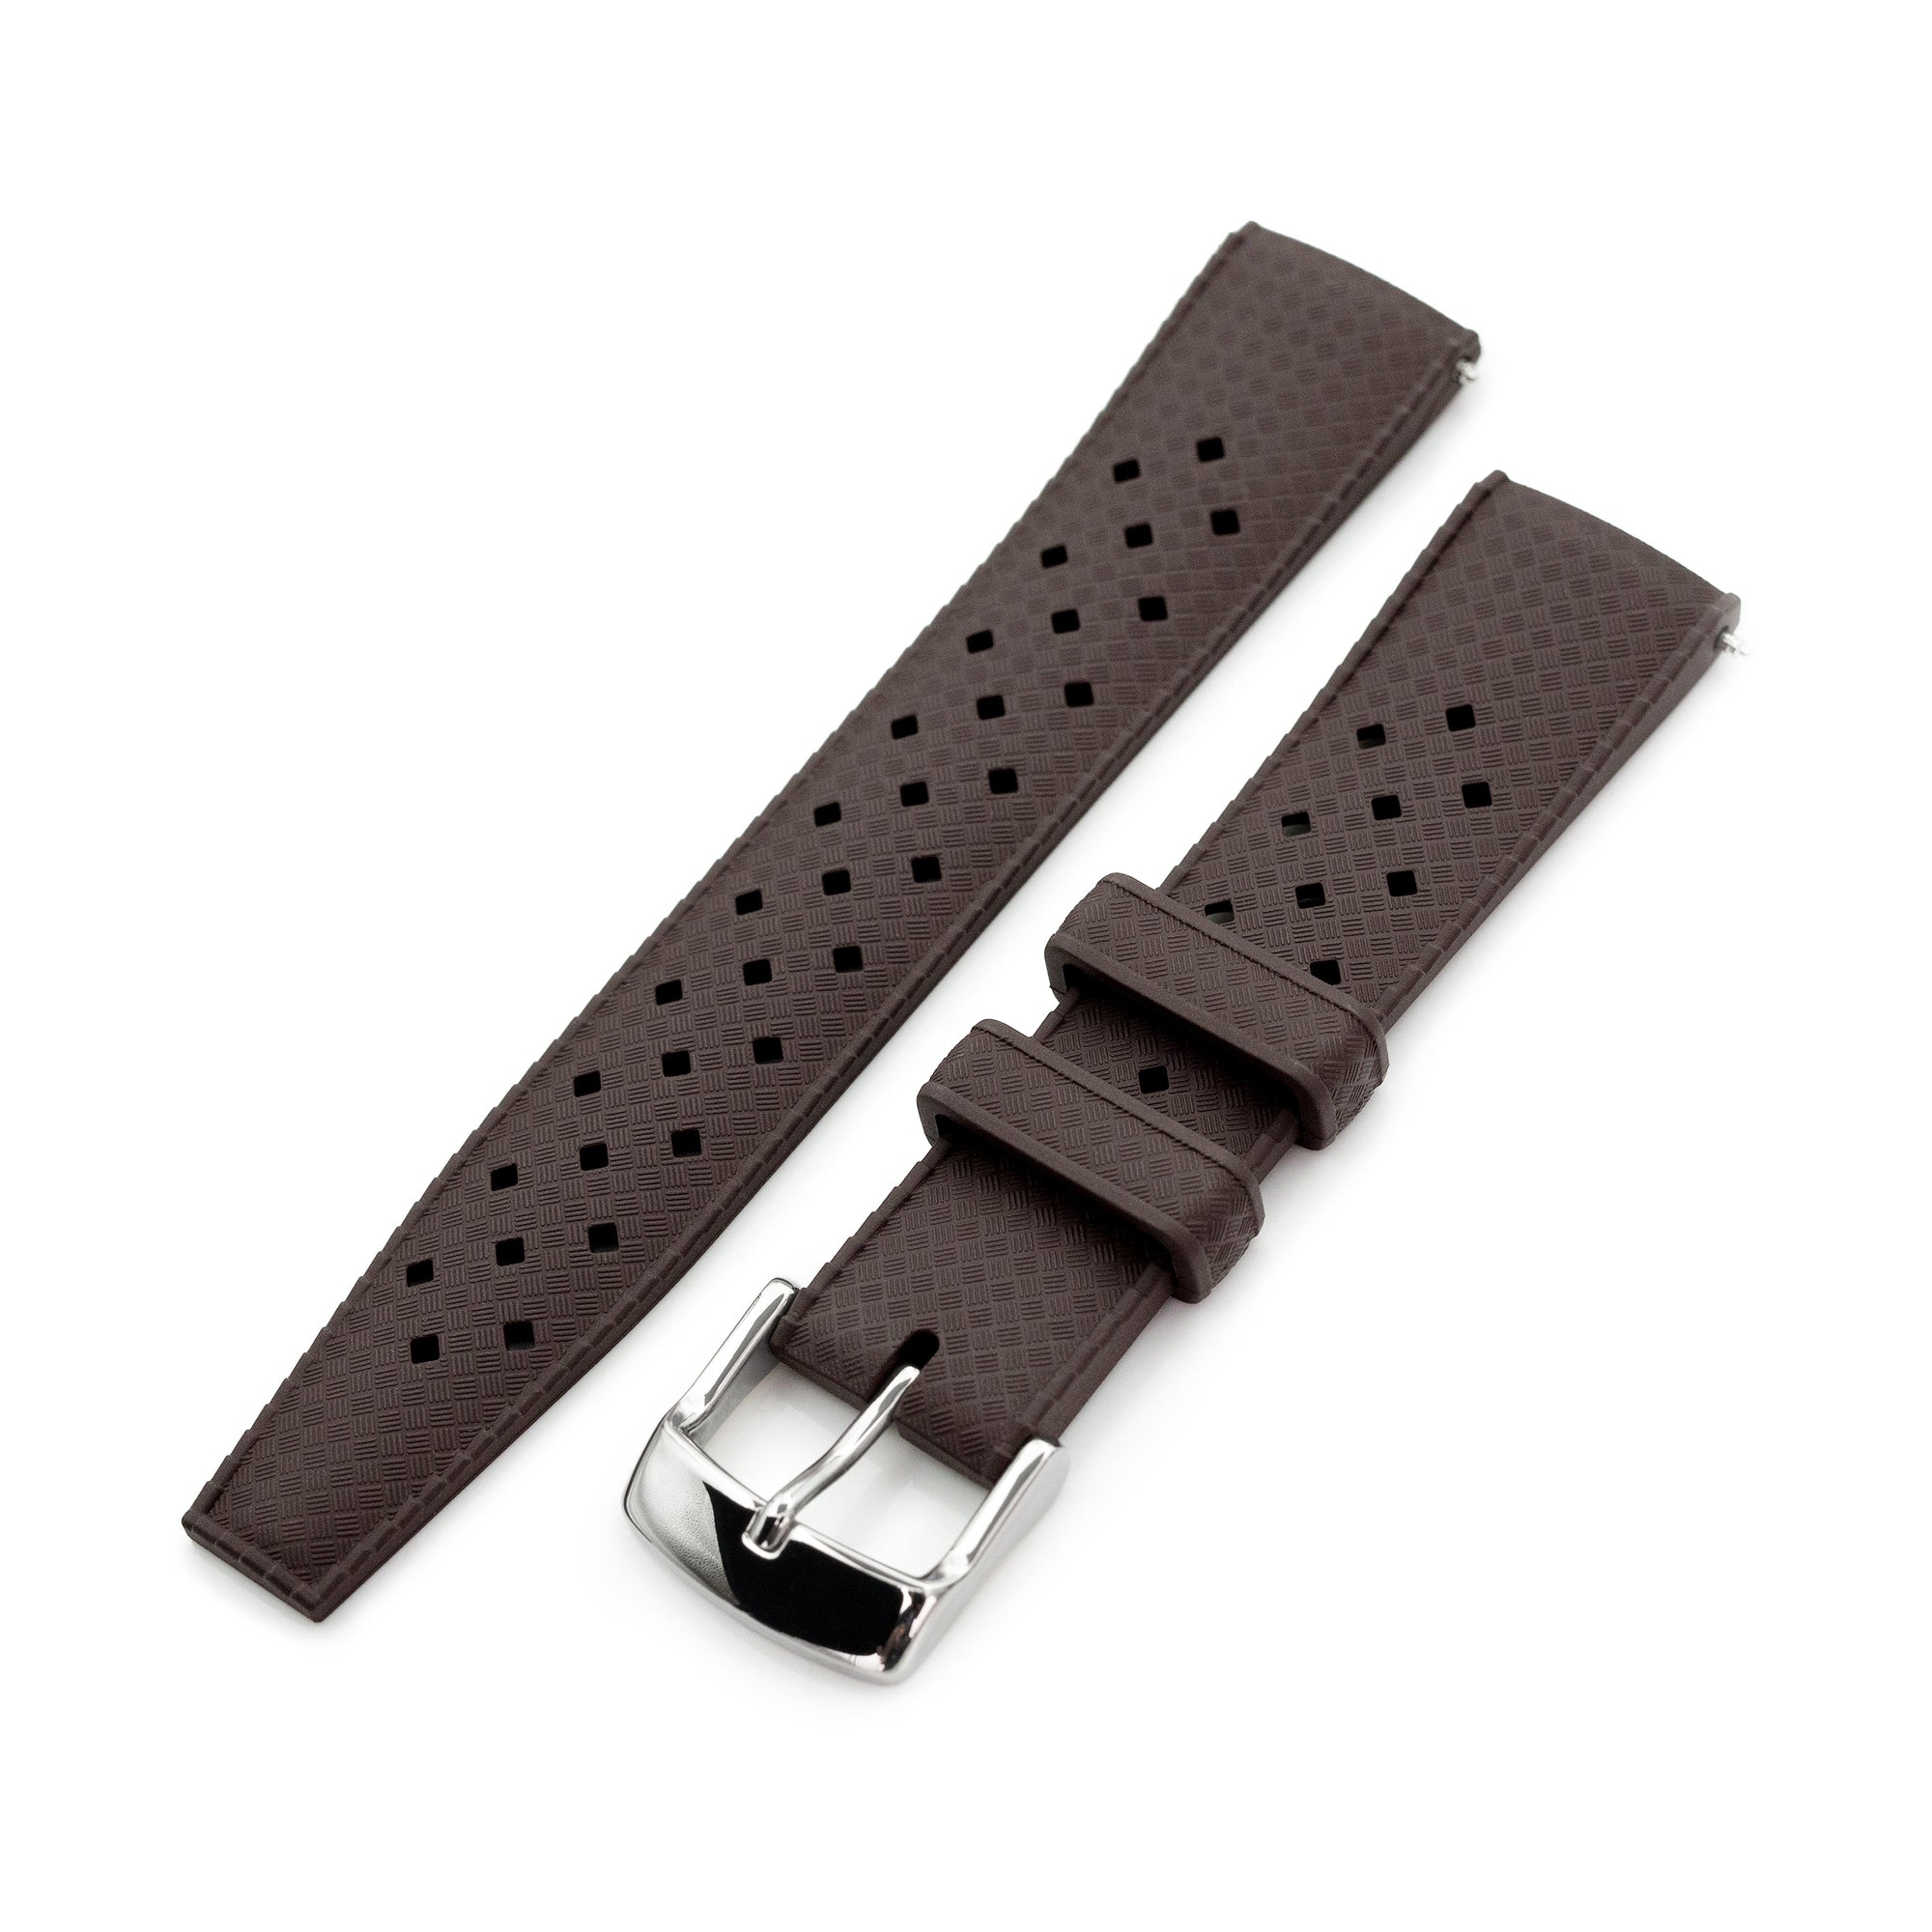 20mm Quick Release Tropical-Style FKM rubber watch strap, Dark Brown Strapcode watch bands